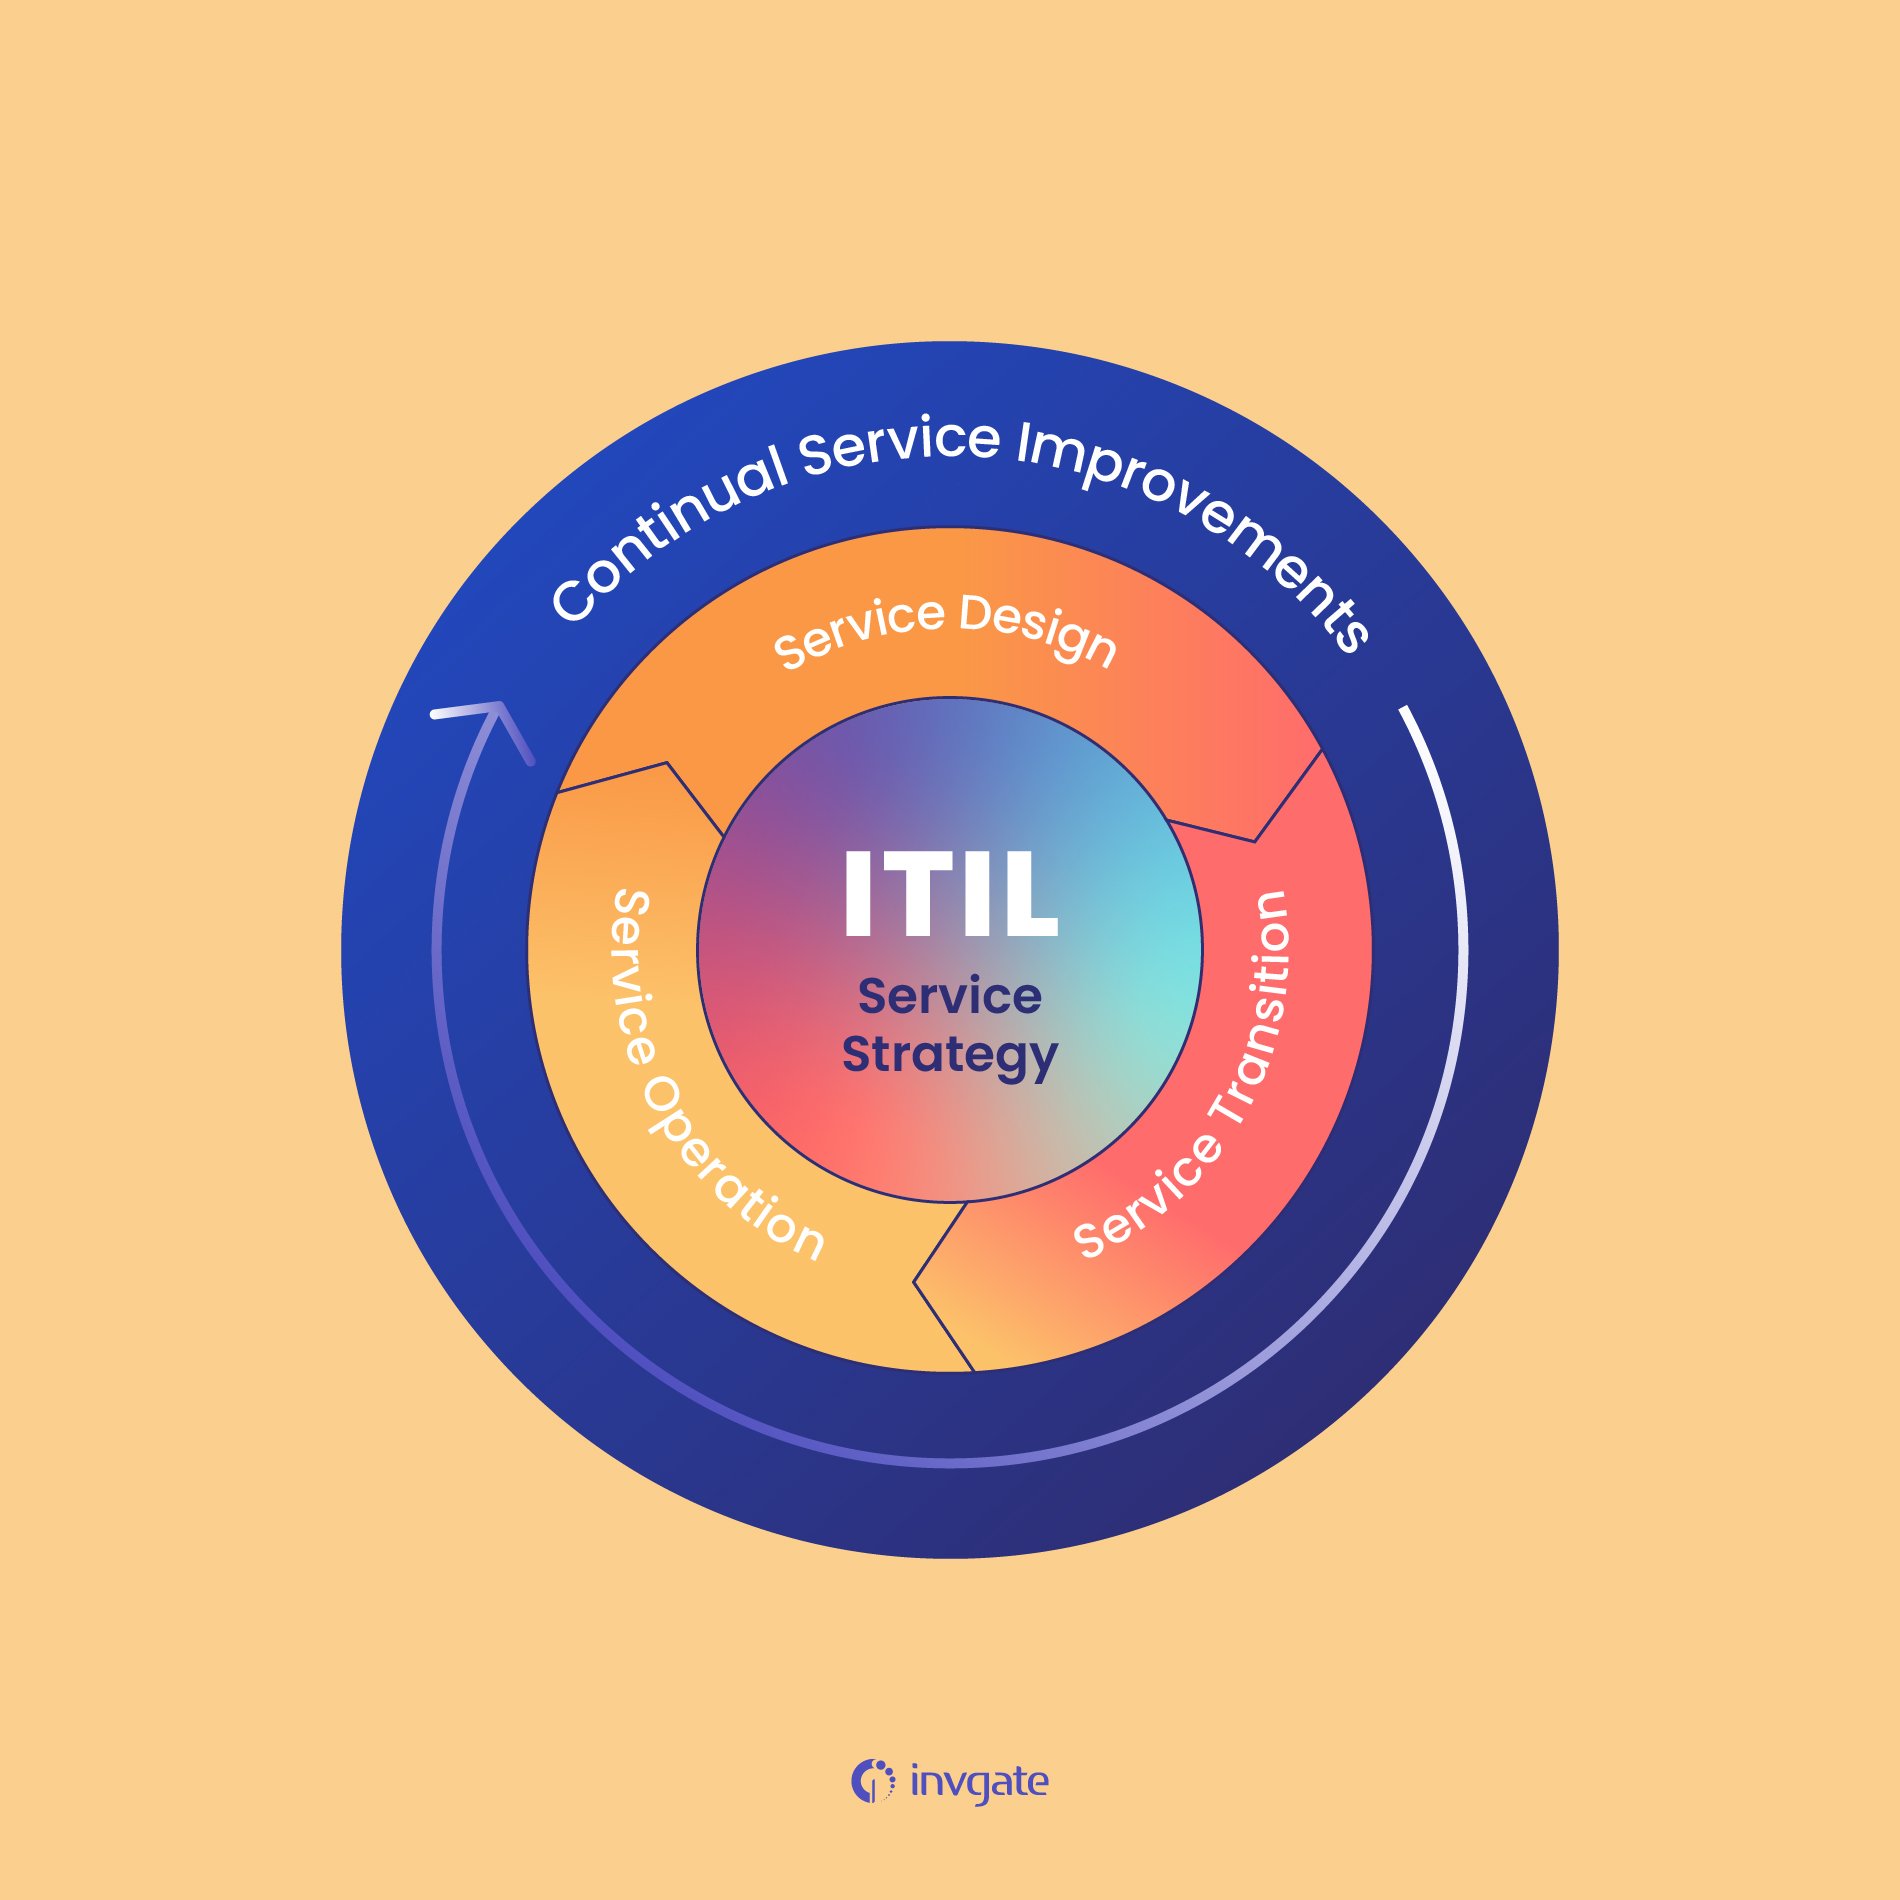 ITIL service lifecycle